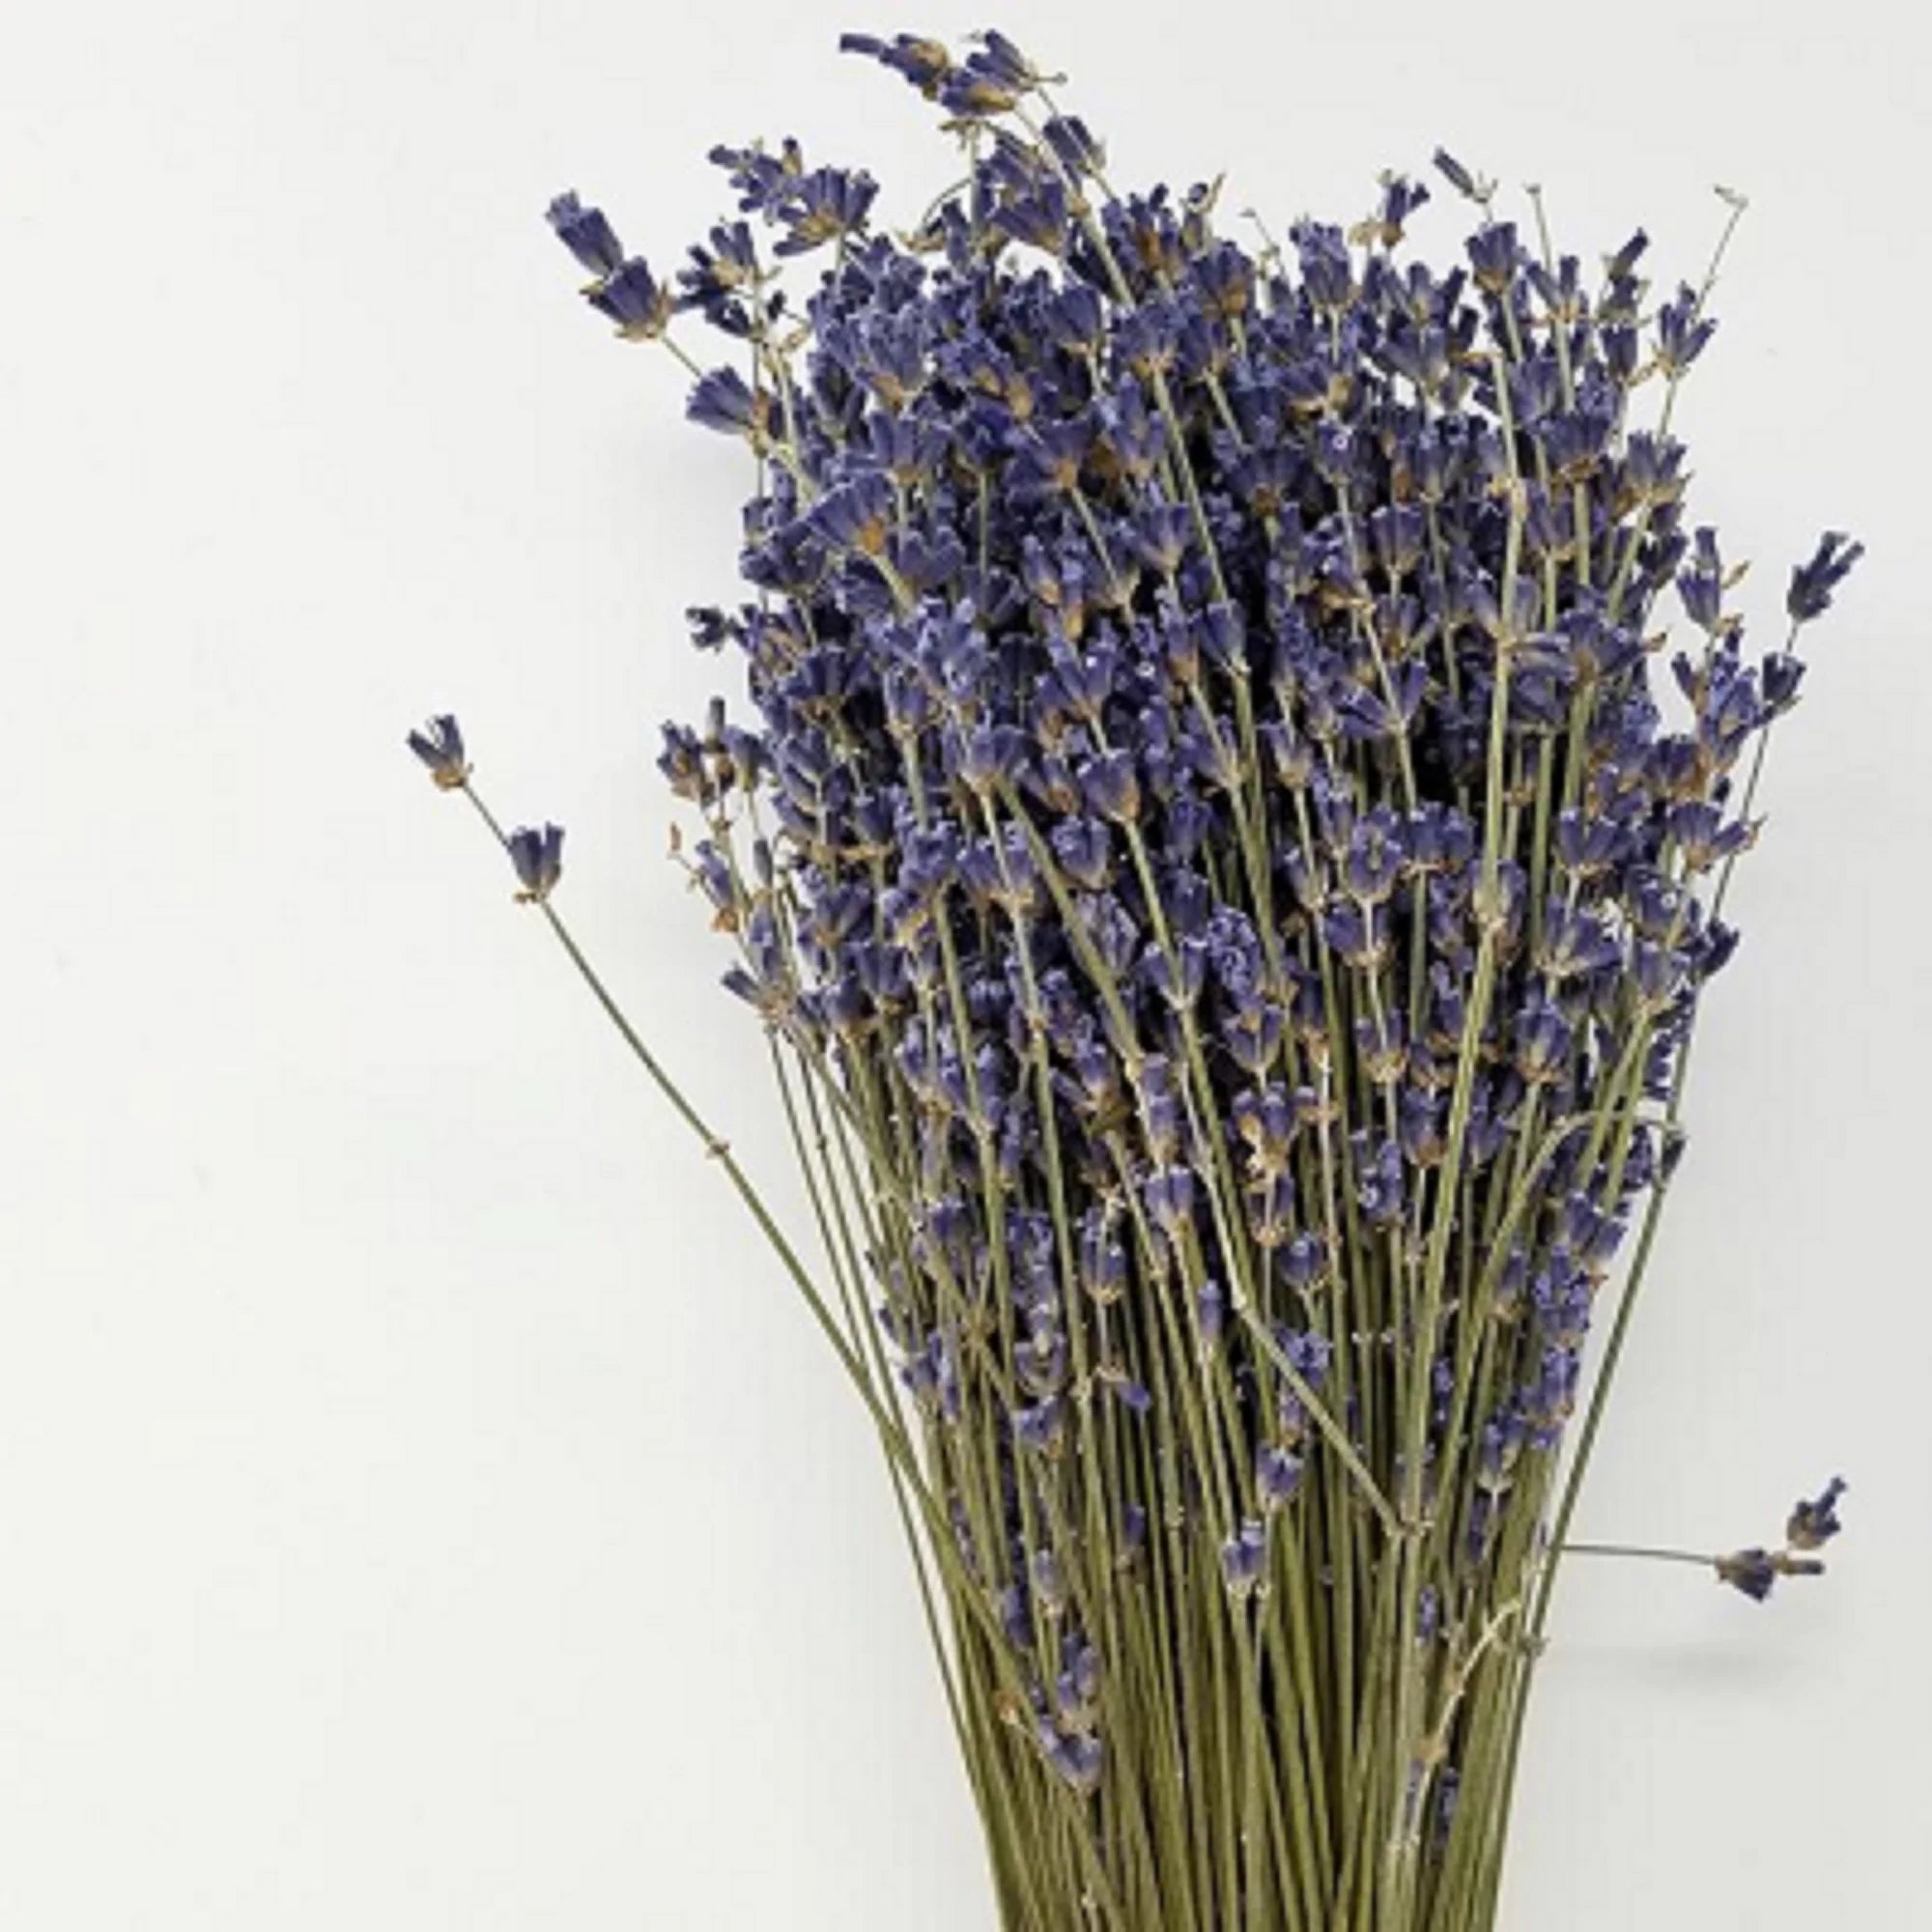  High-Grade French Lavender Flower BUNCH 14" L by OMSutra OMSutra Perfumarie